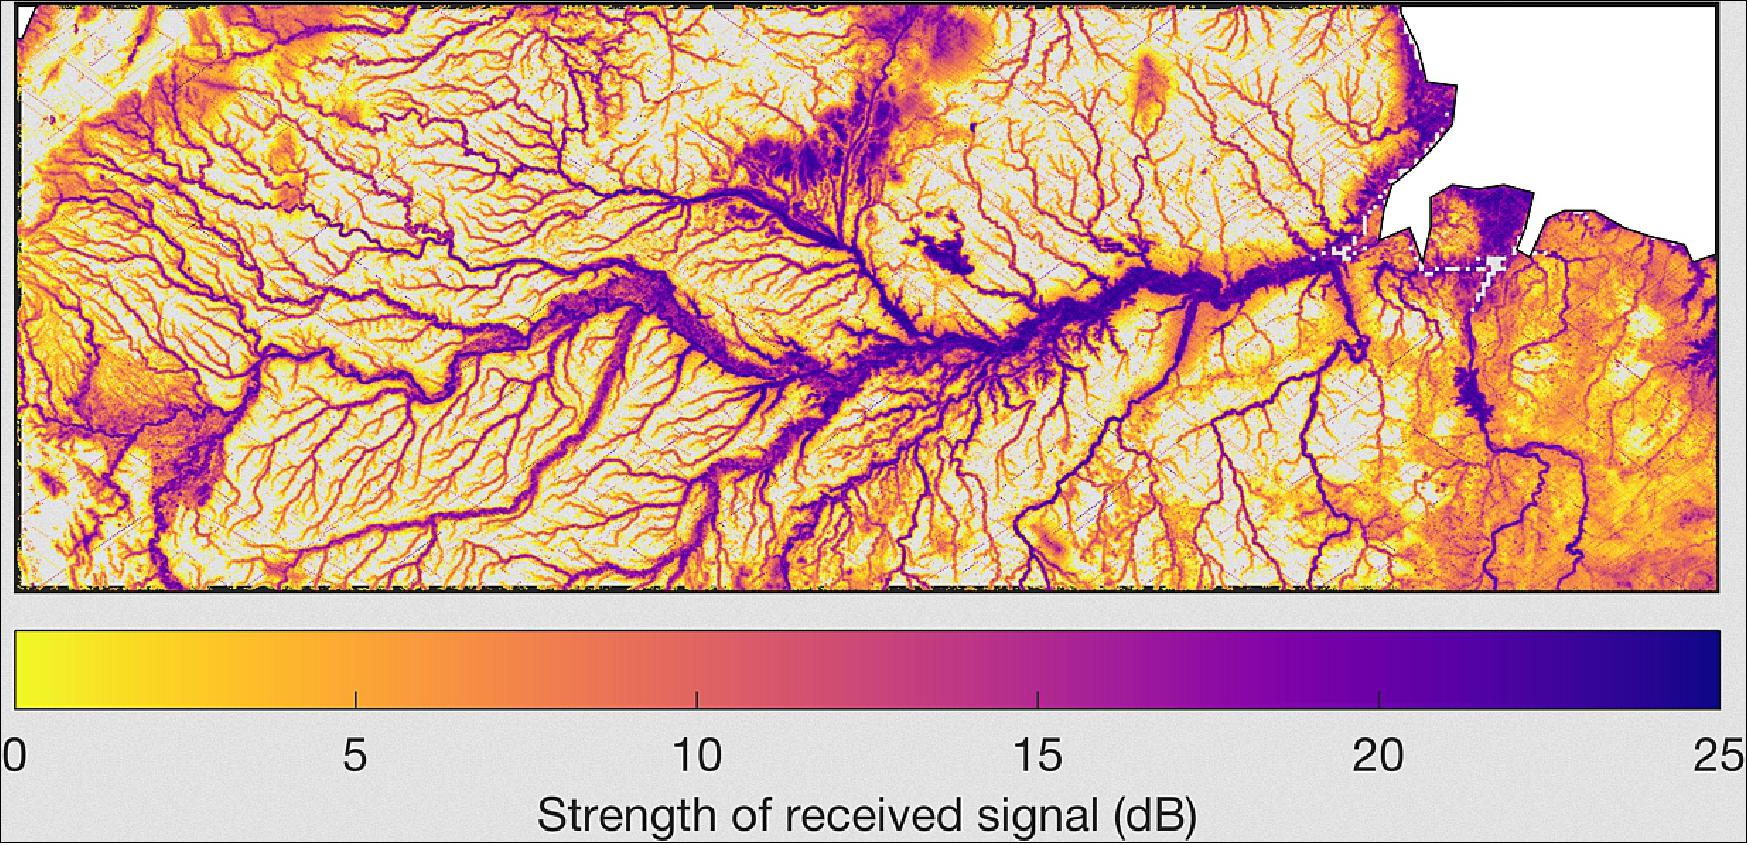 Figure 33: CYGNSS data delineates the streams and tributaries across the Amazon basin in South America (image credit: Clara Chew, UCAR)